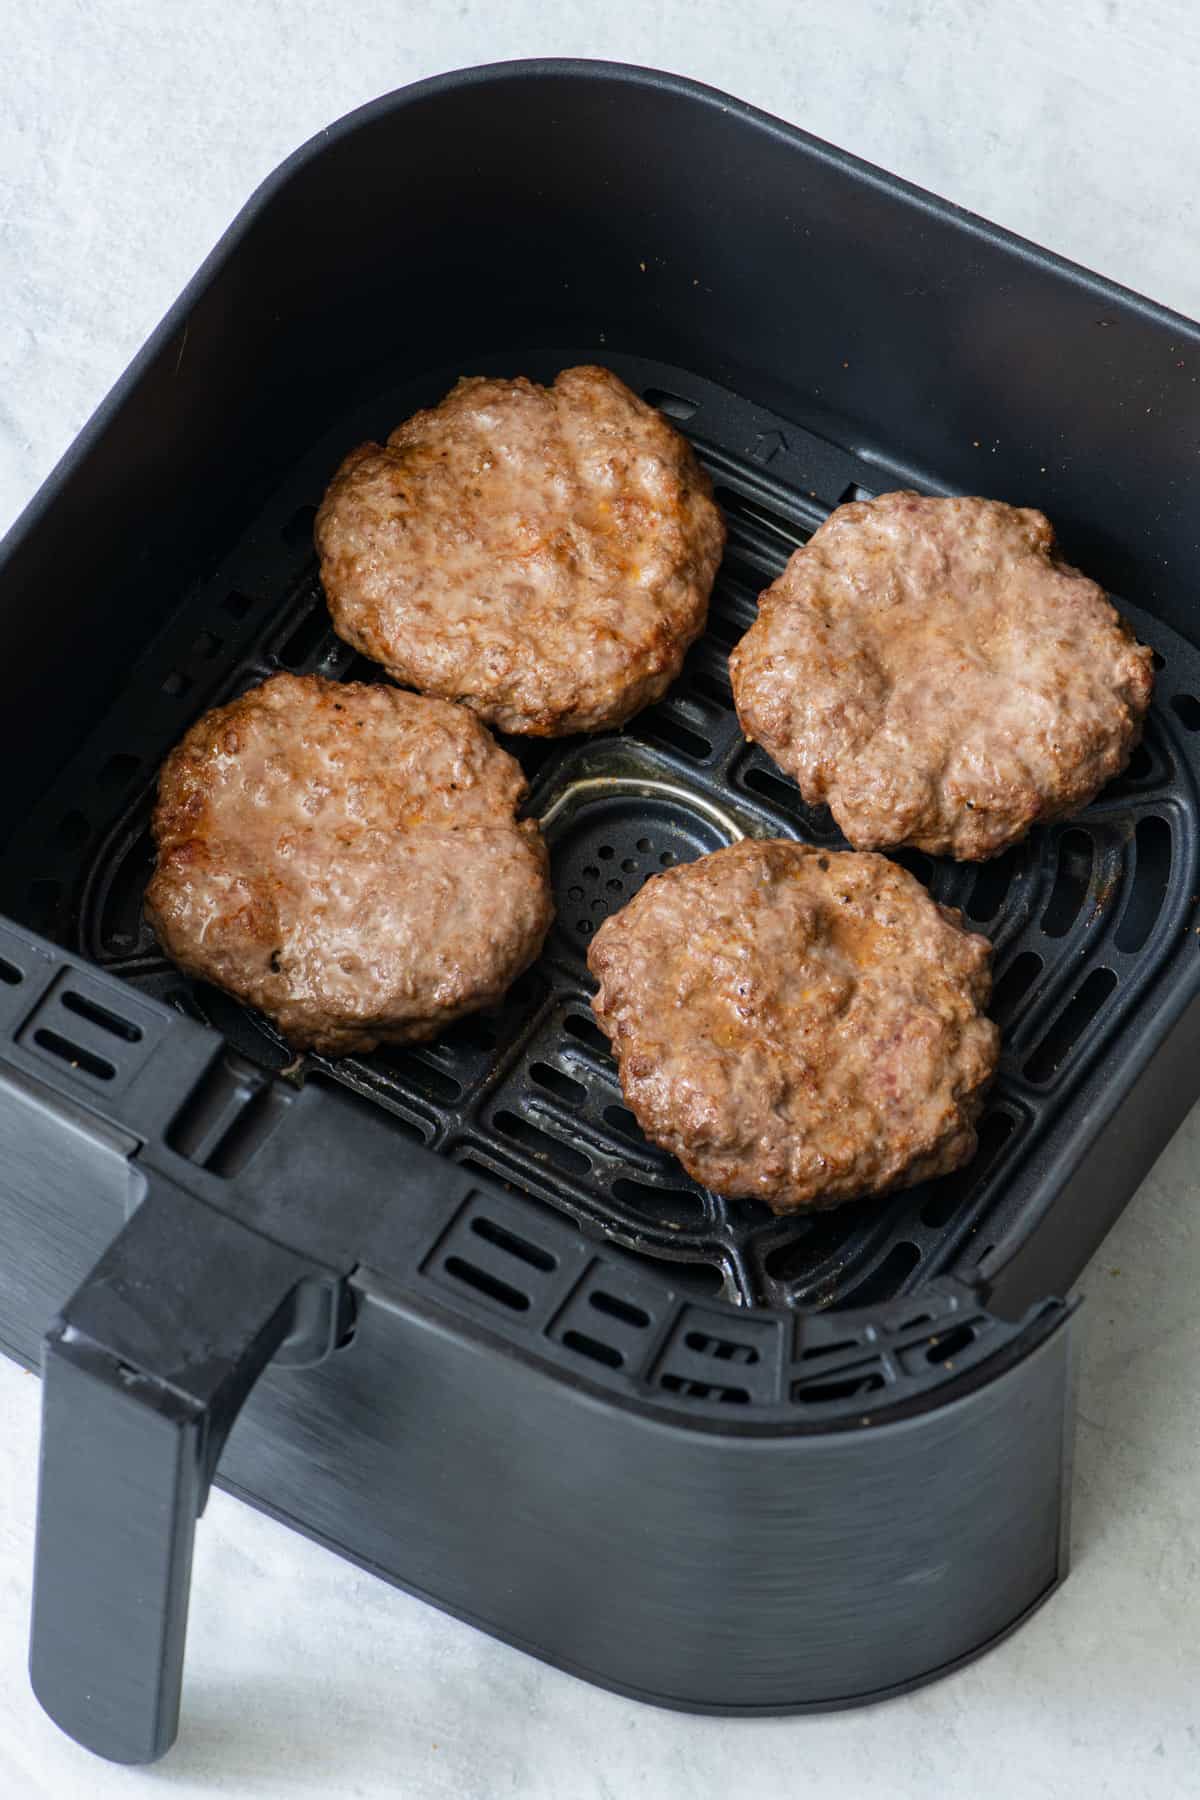 4 patties in air fryer after being cooked.